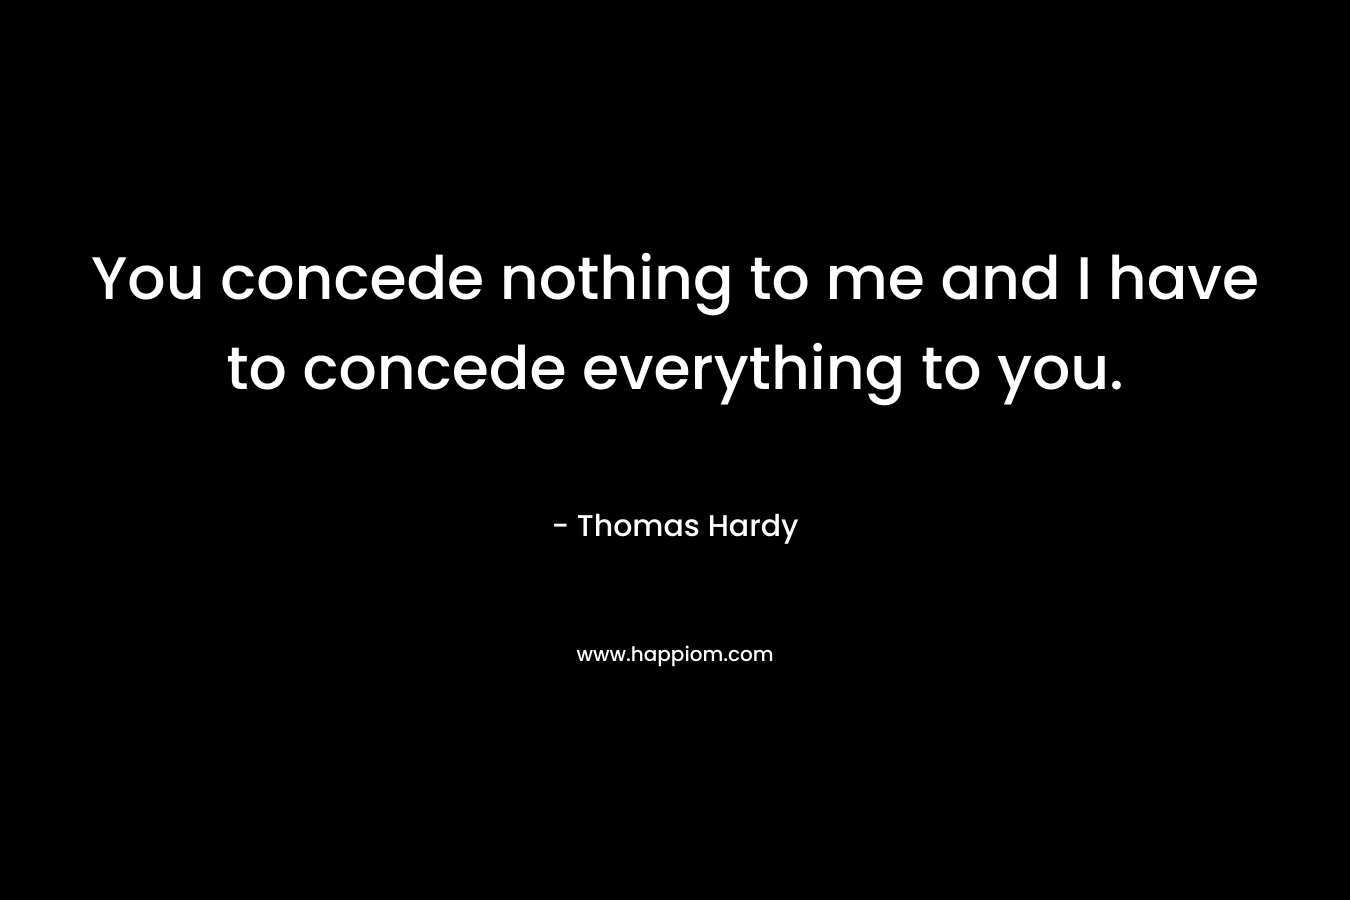 You concede nothing to me and I have to concede everything to you.